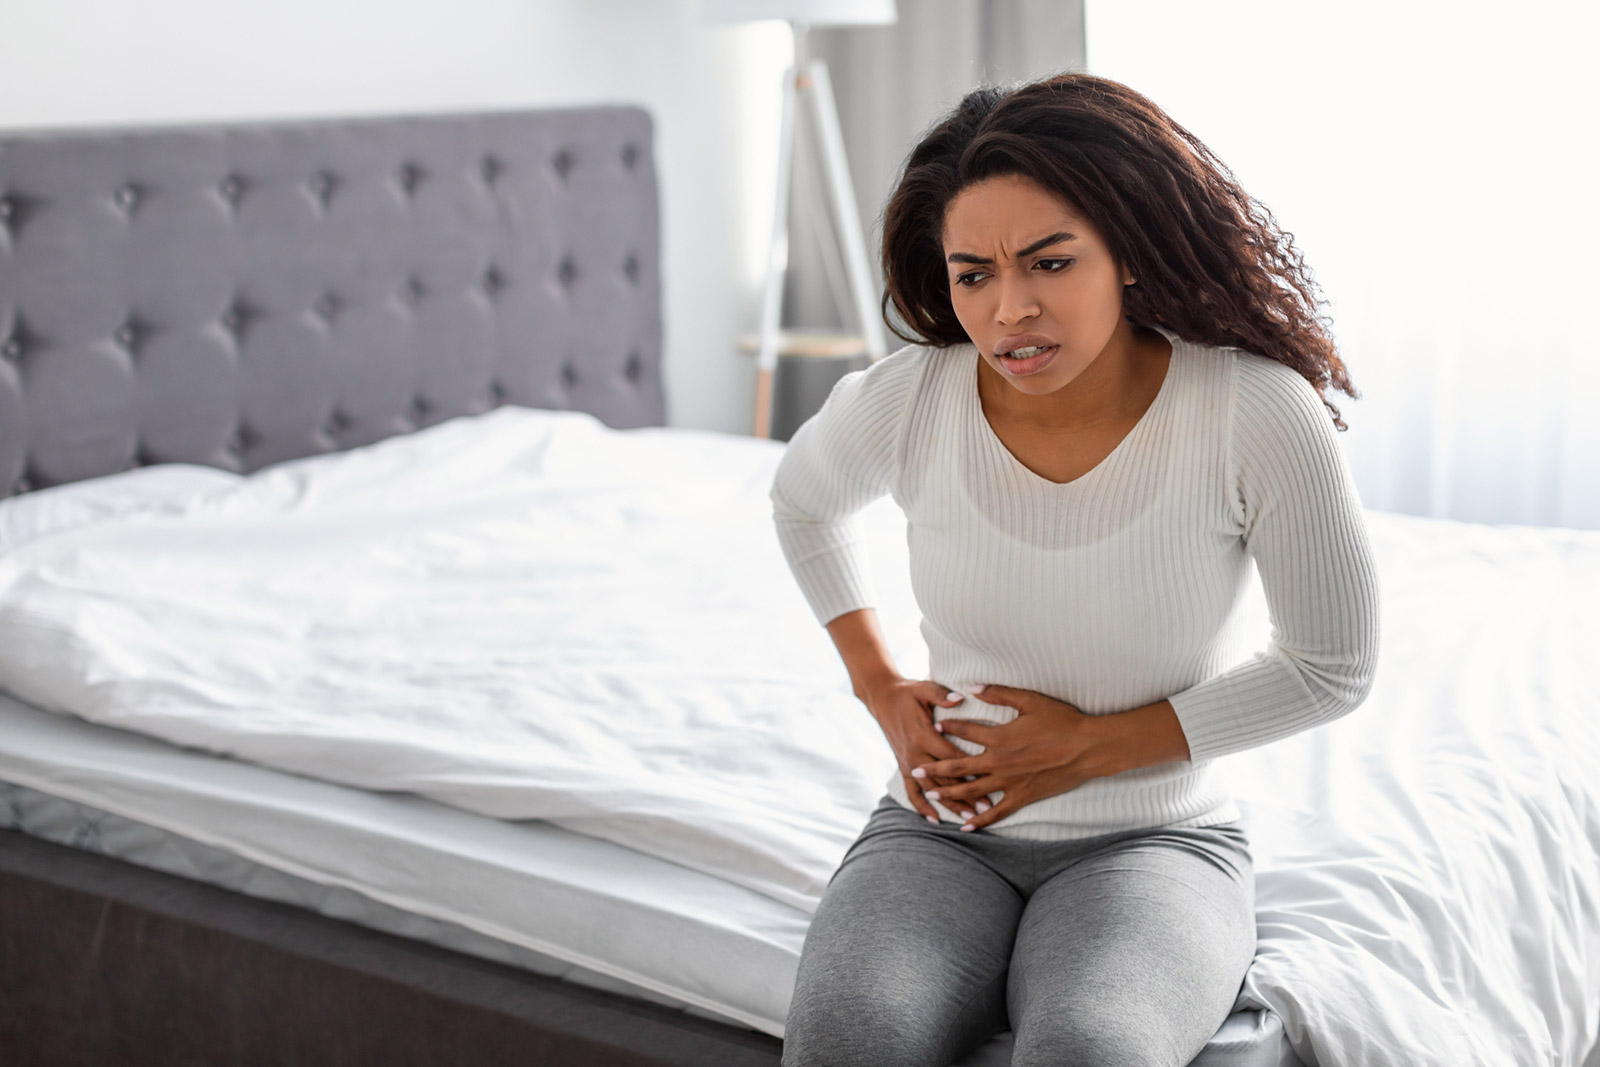 Possible Reasons for IBS